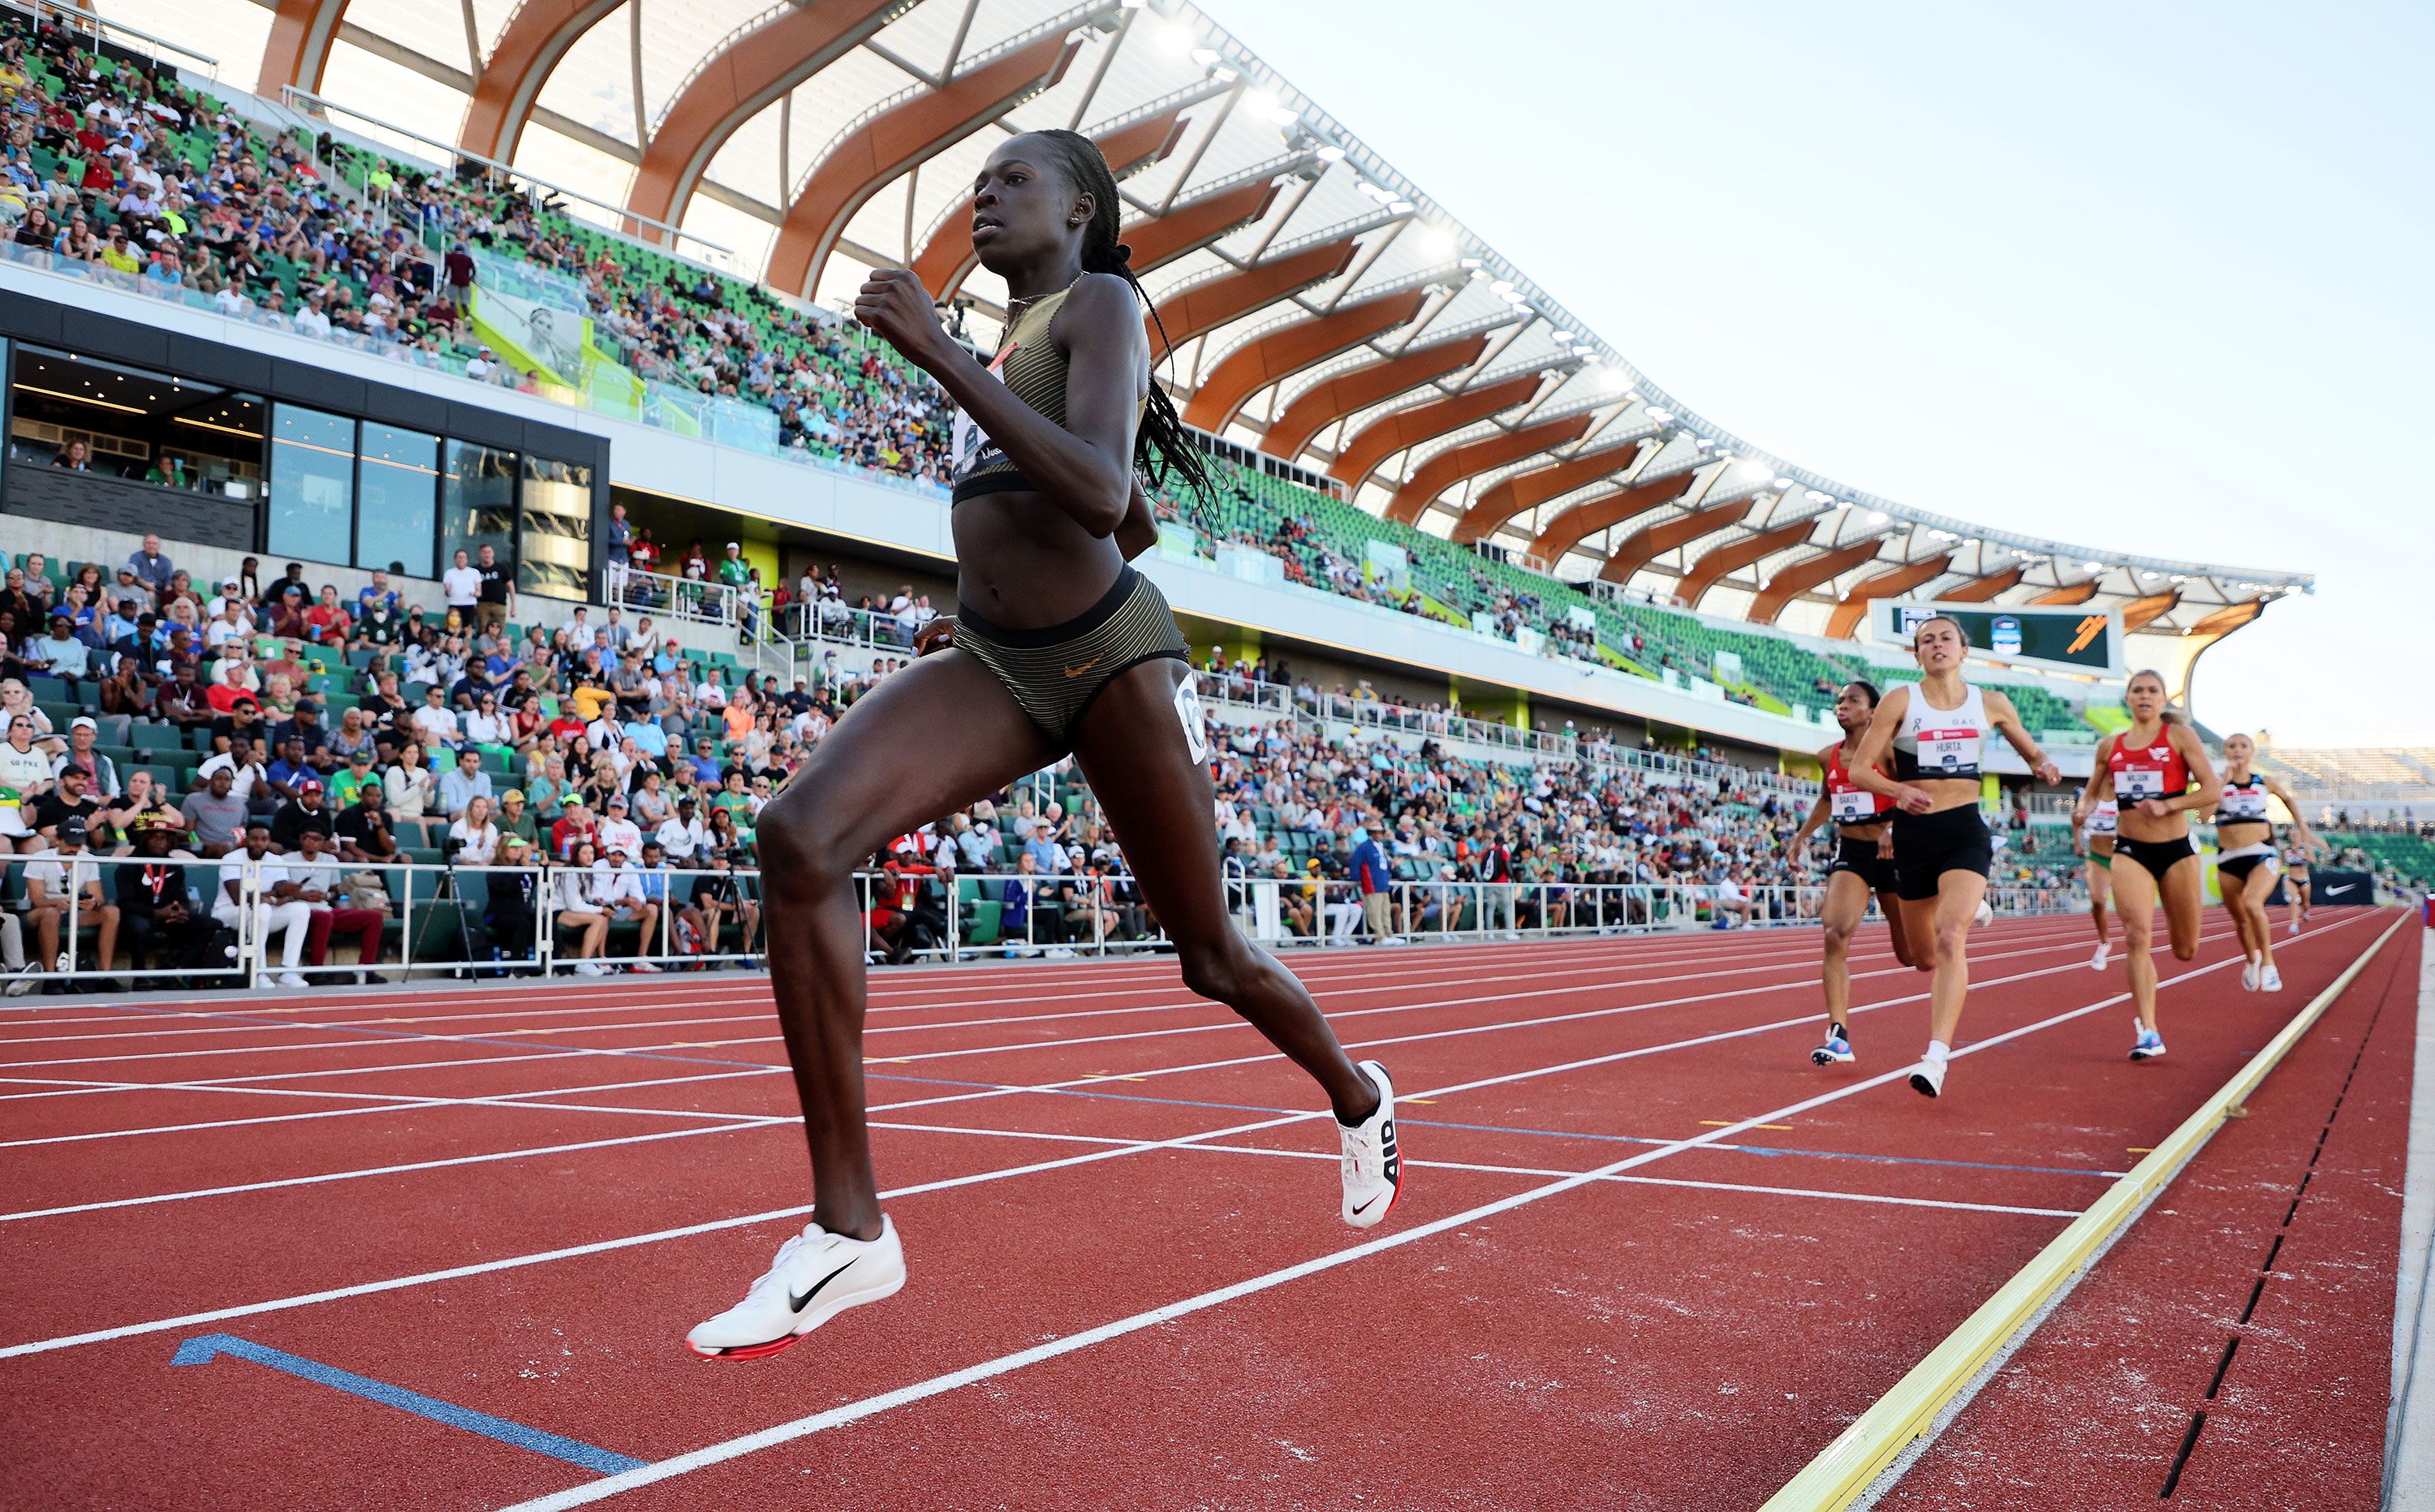 Track and field rivalries power Tokyo Olympics results, excitement